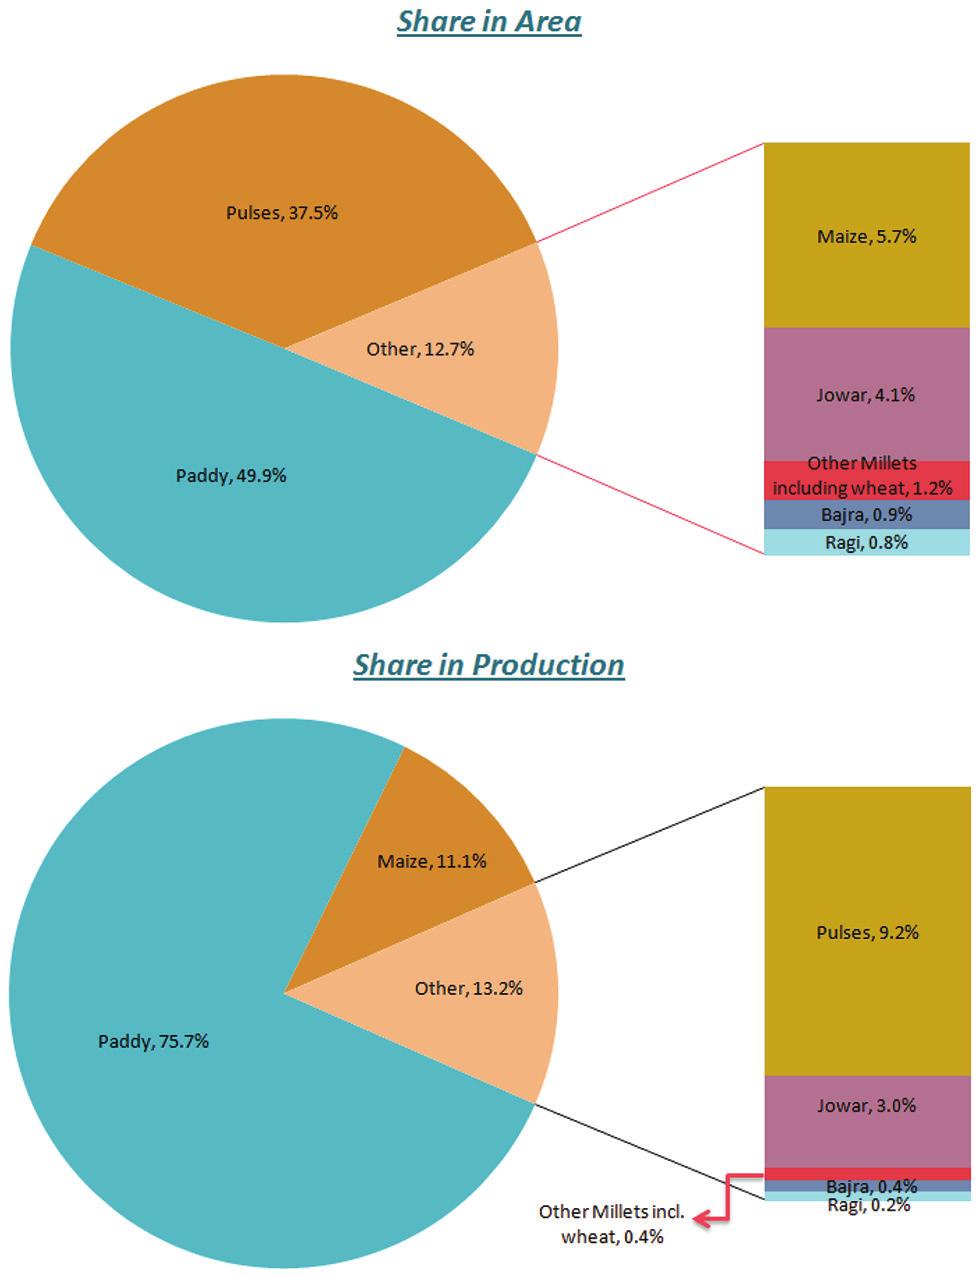 Exhibit 6: Share of Food Grains in Area under Cultivation and Production